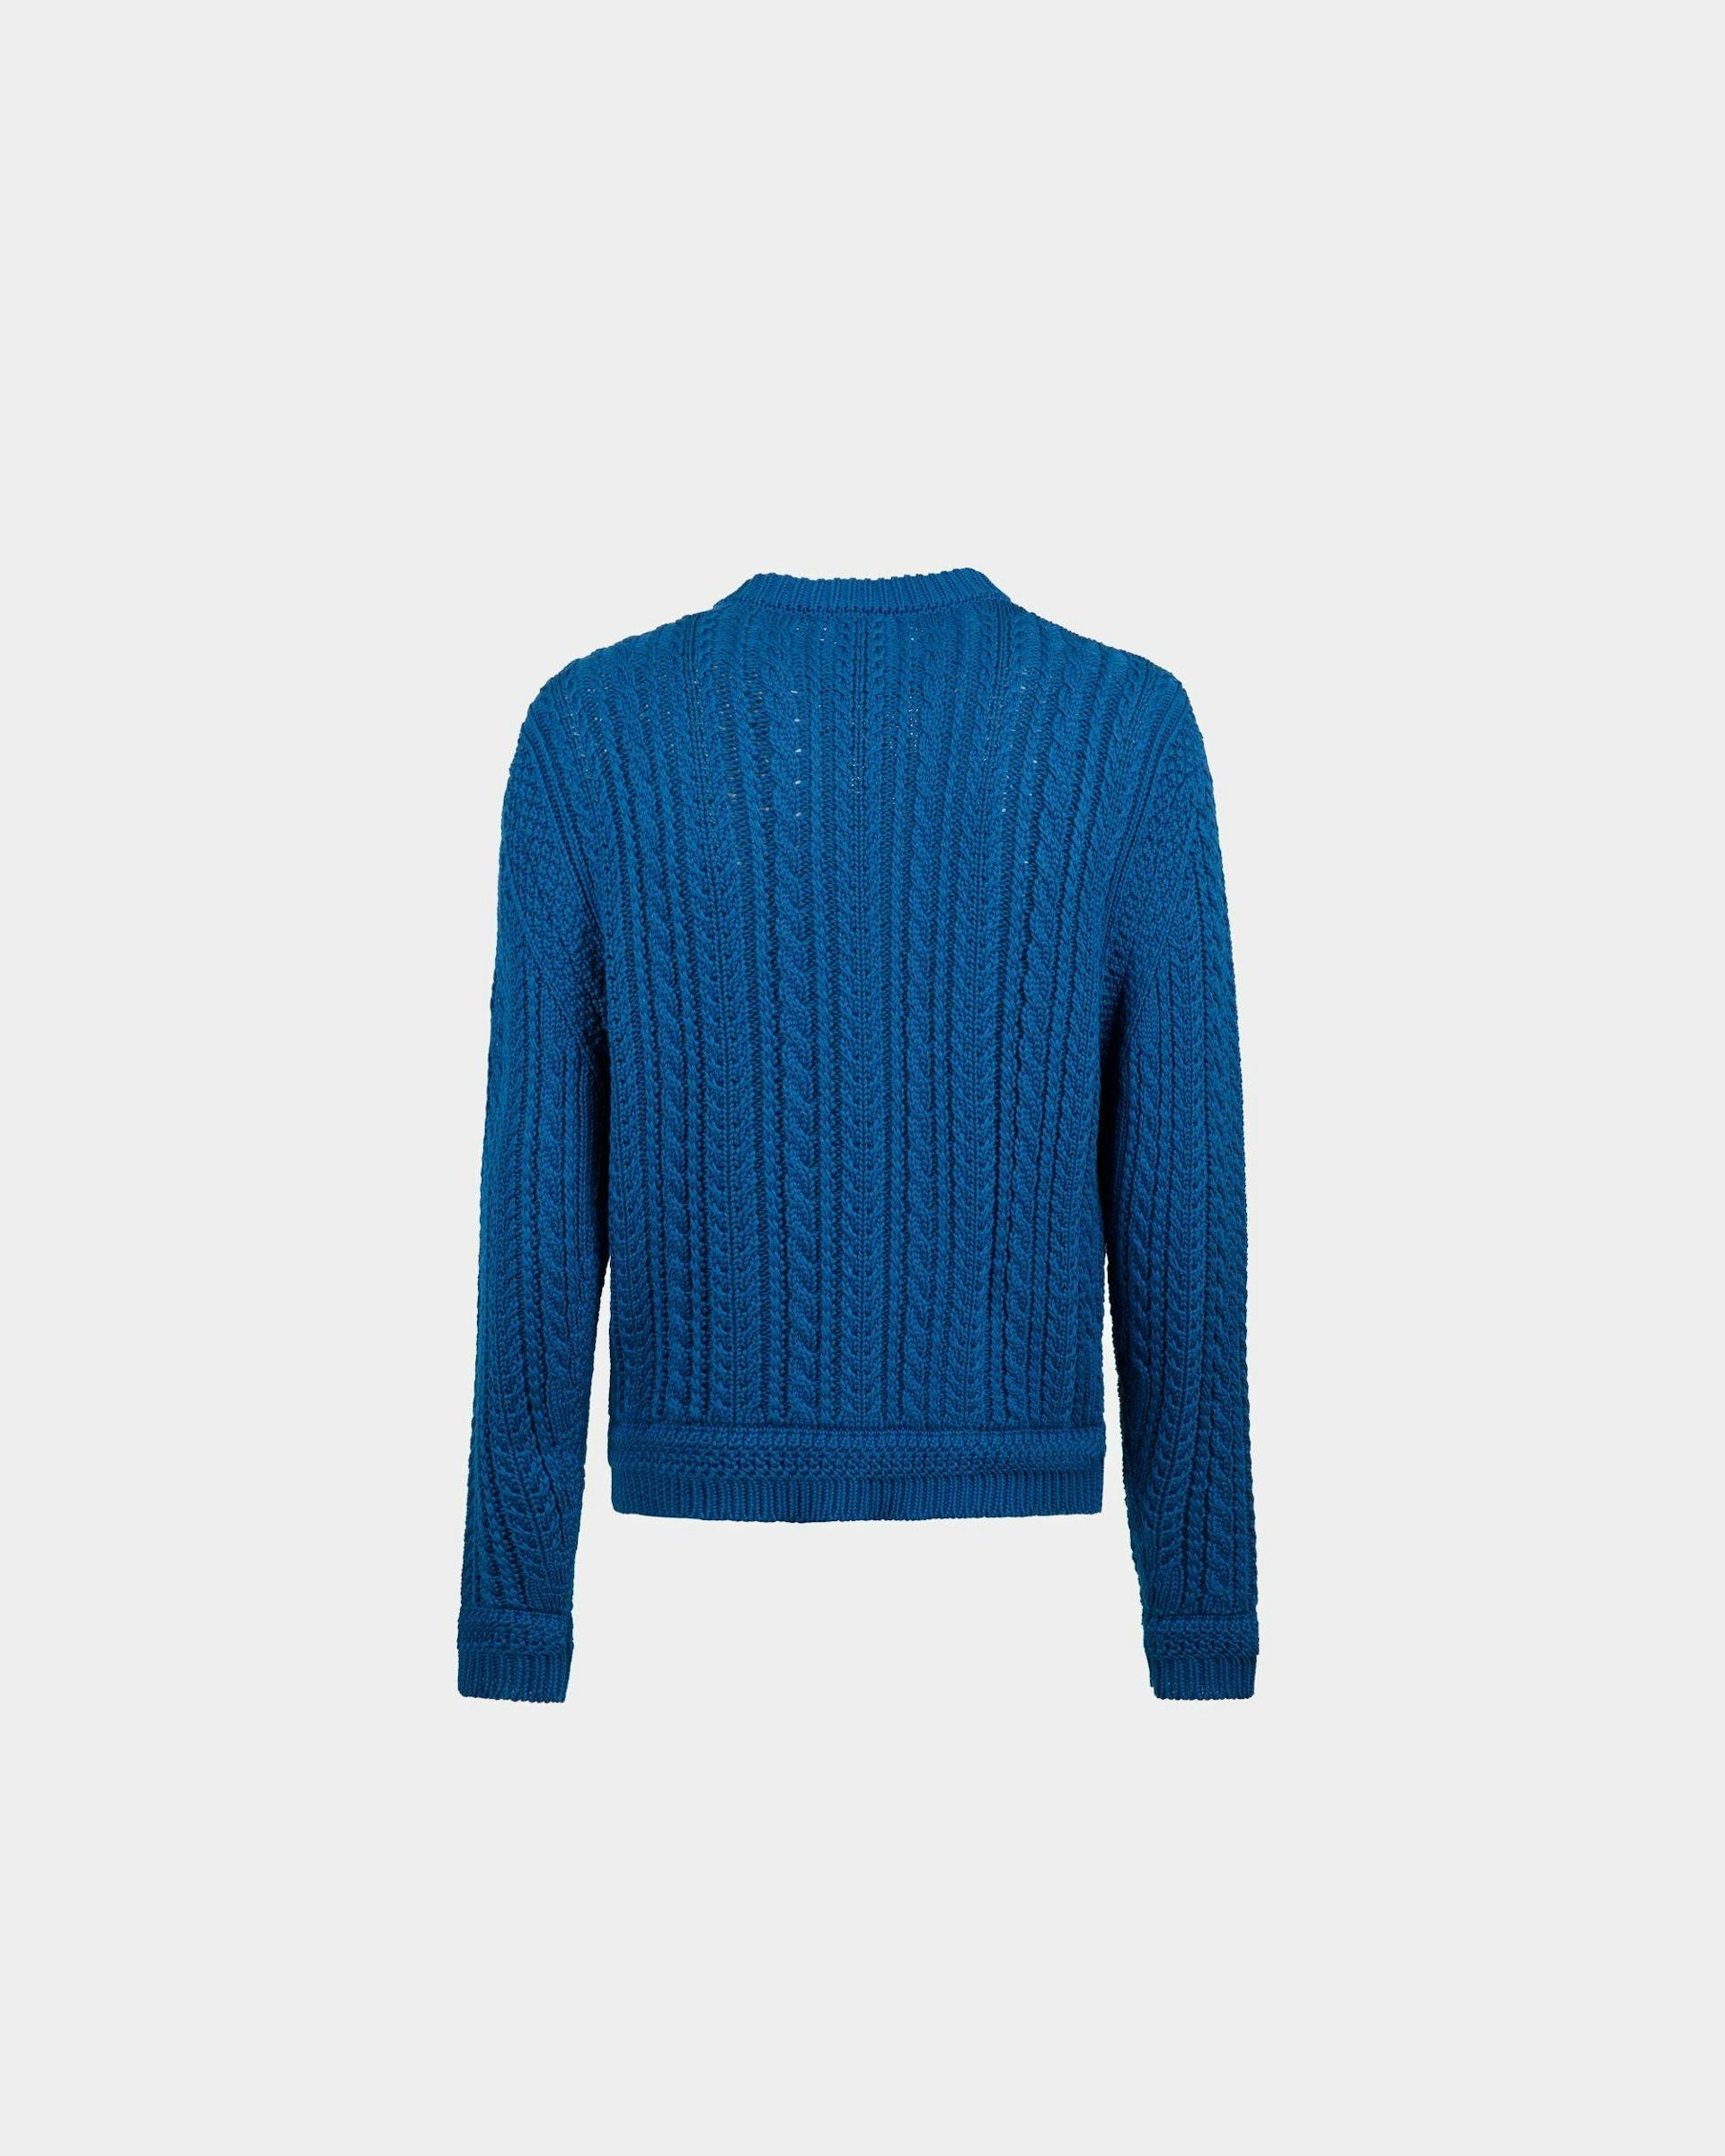 Men's Cable-knit Sweater in Blue Cotton | Bally | Still Life Back